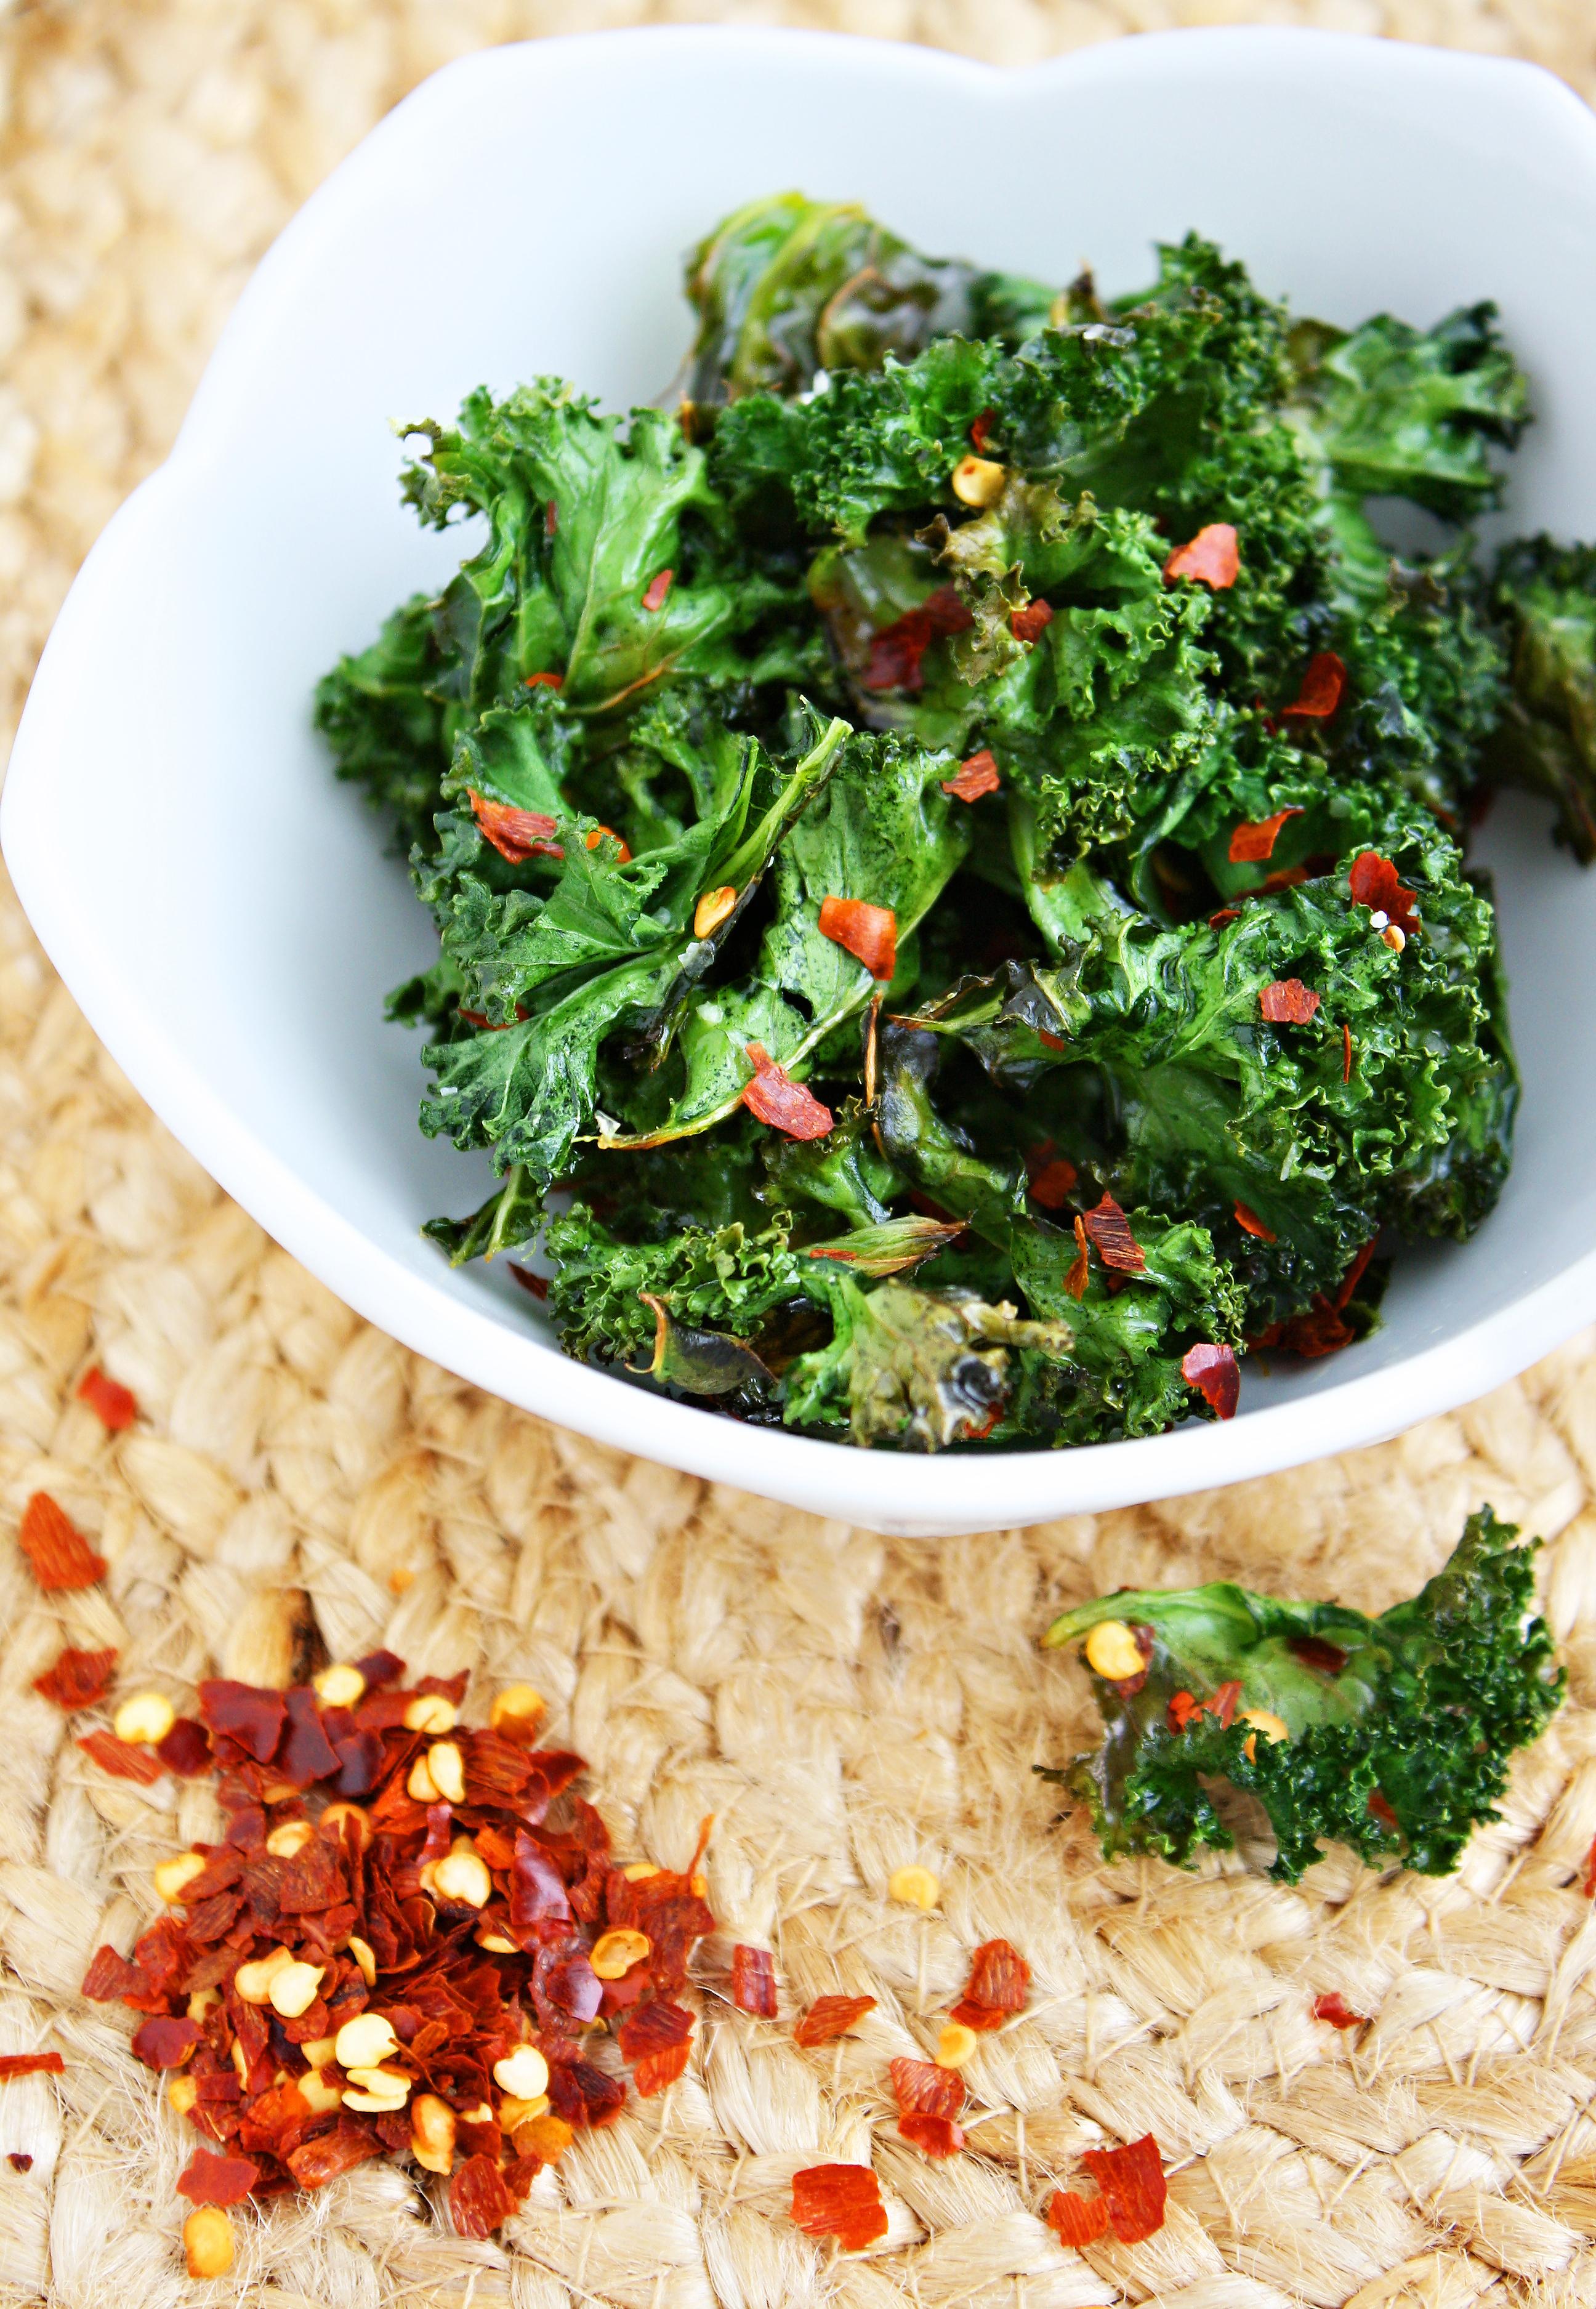 Spicy Baked Kale Chips – The Comfort of Cooking